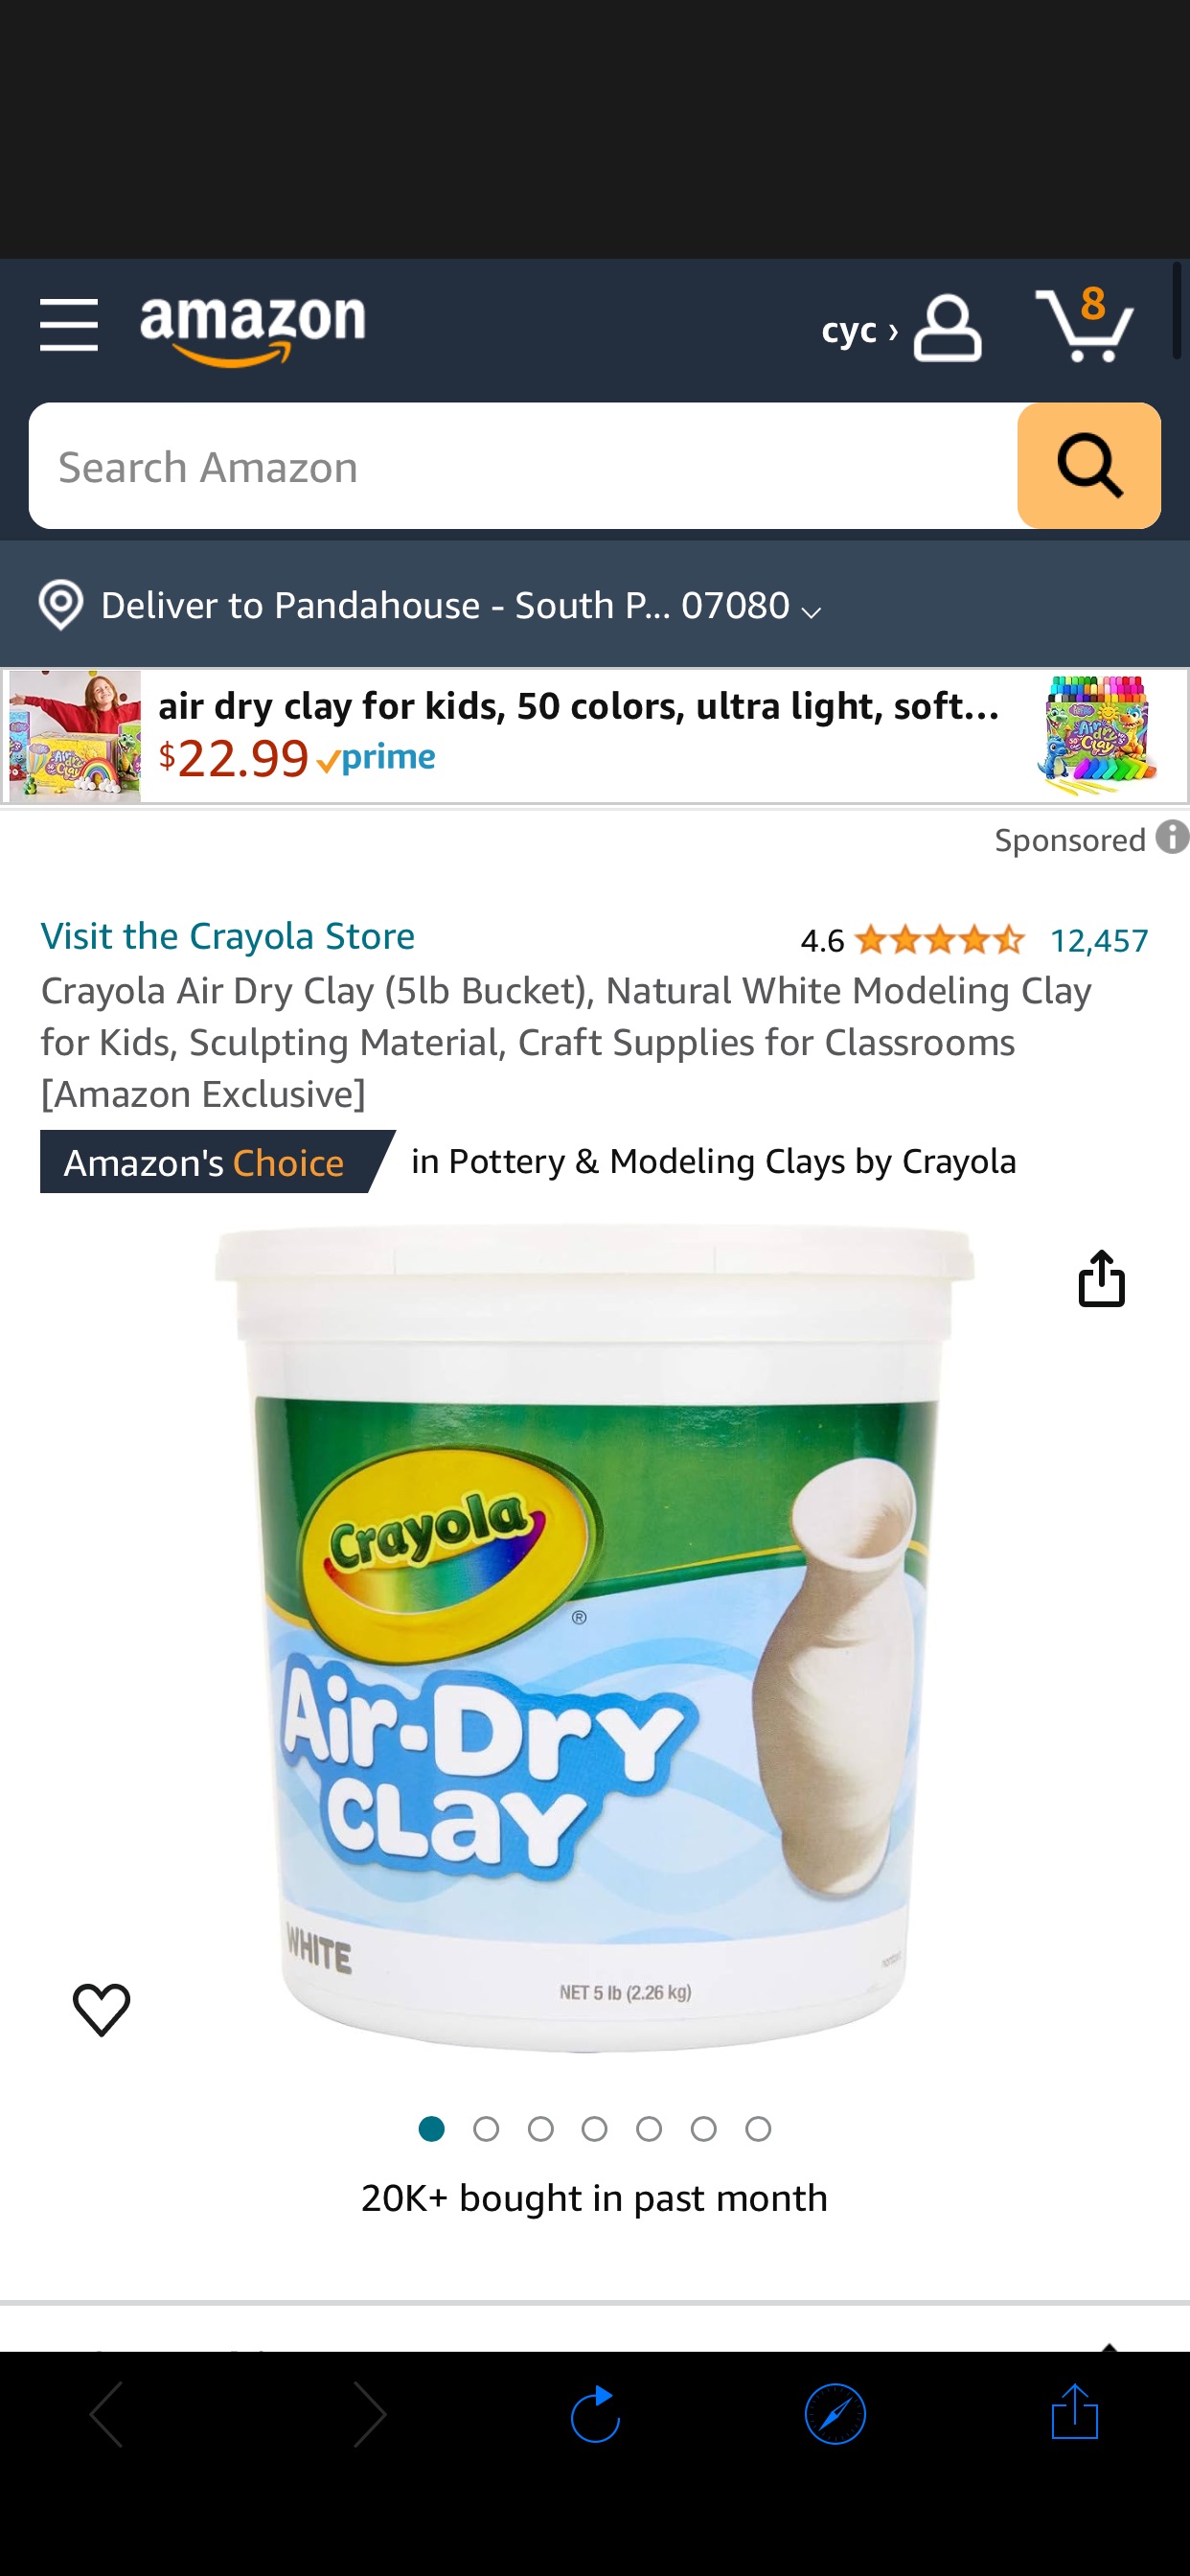 Amazon.com: Crayola Air Dry Clay (5lb Bucket), Natural White Modeling Clay for Kids, Sculpting Material, Craft Supplies for Classrooms [Amazon Exclusive] : Toys & Games